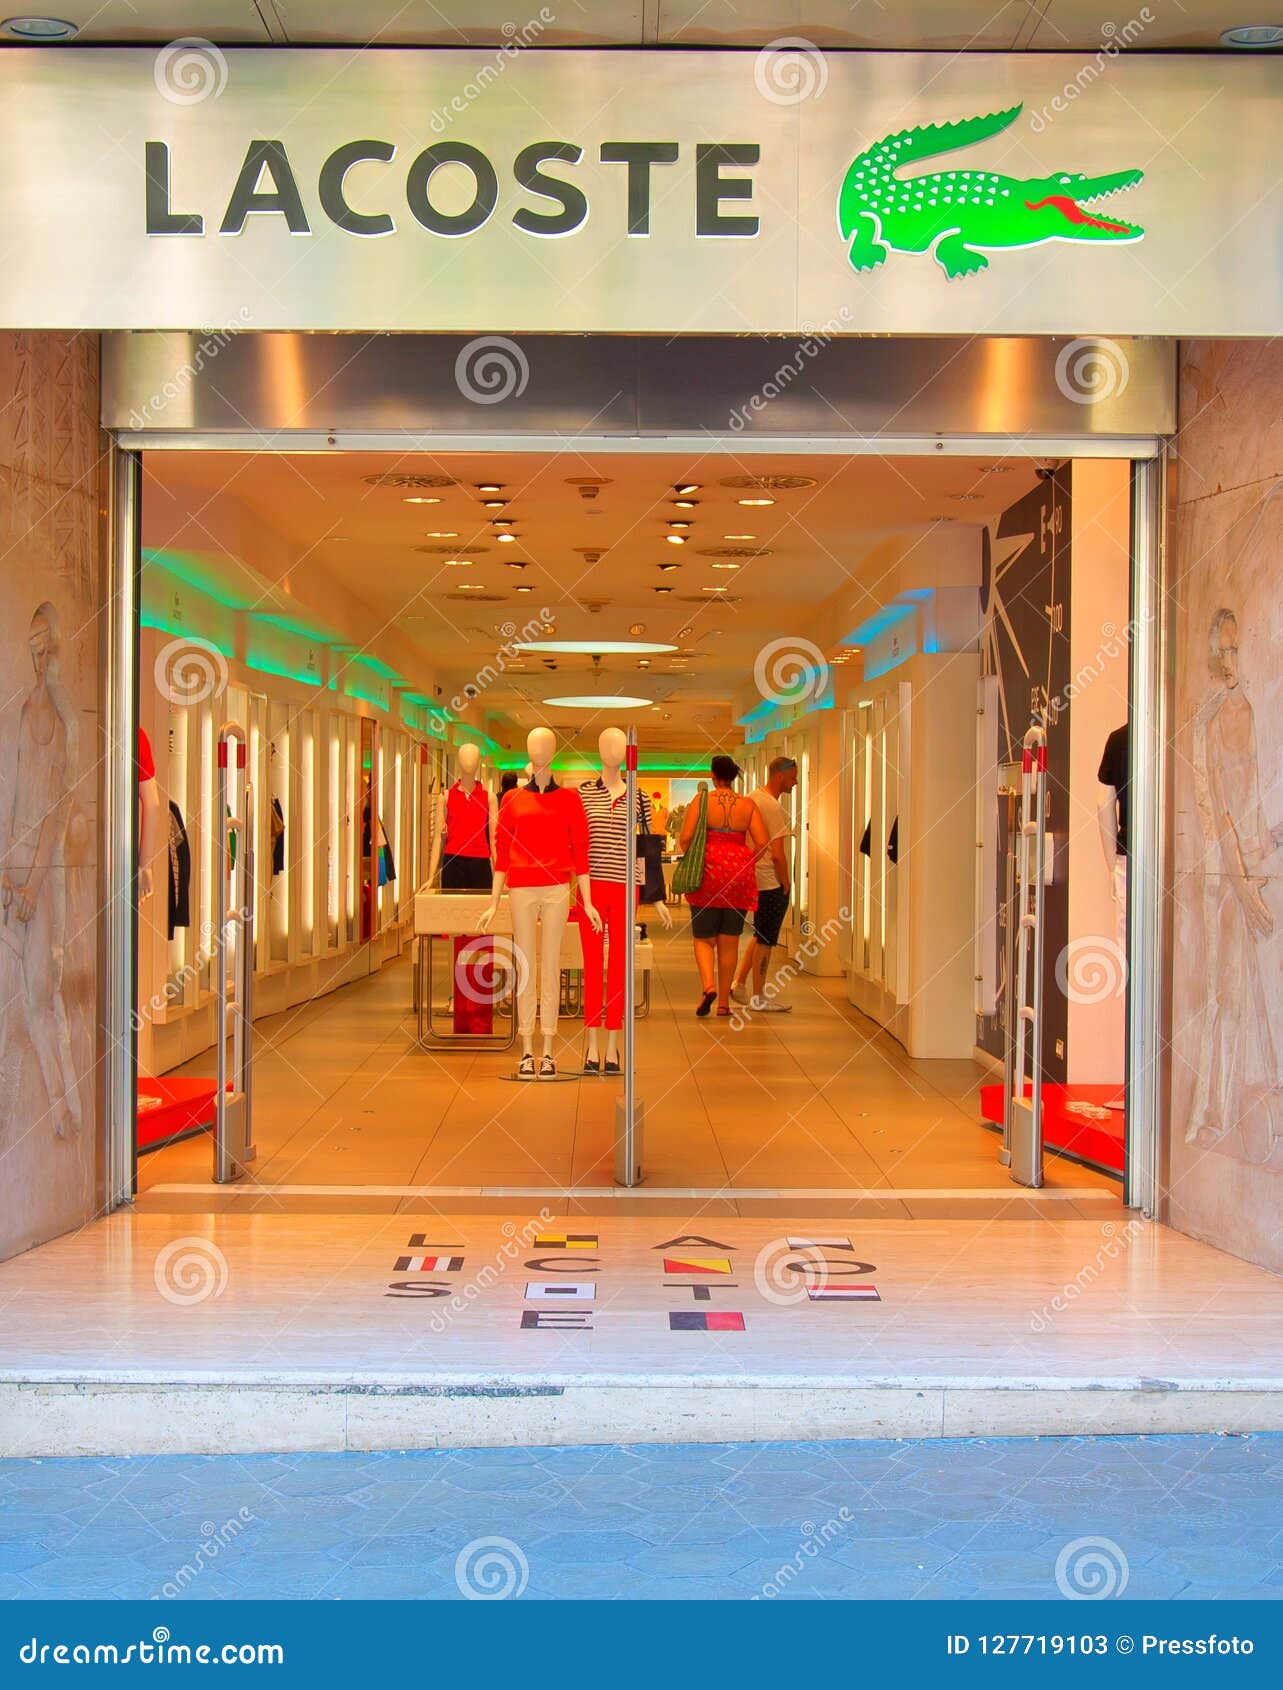 Lacoste in Spain Editorial Stock - Image of background, barcelona: